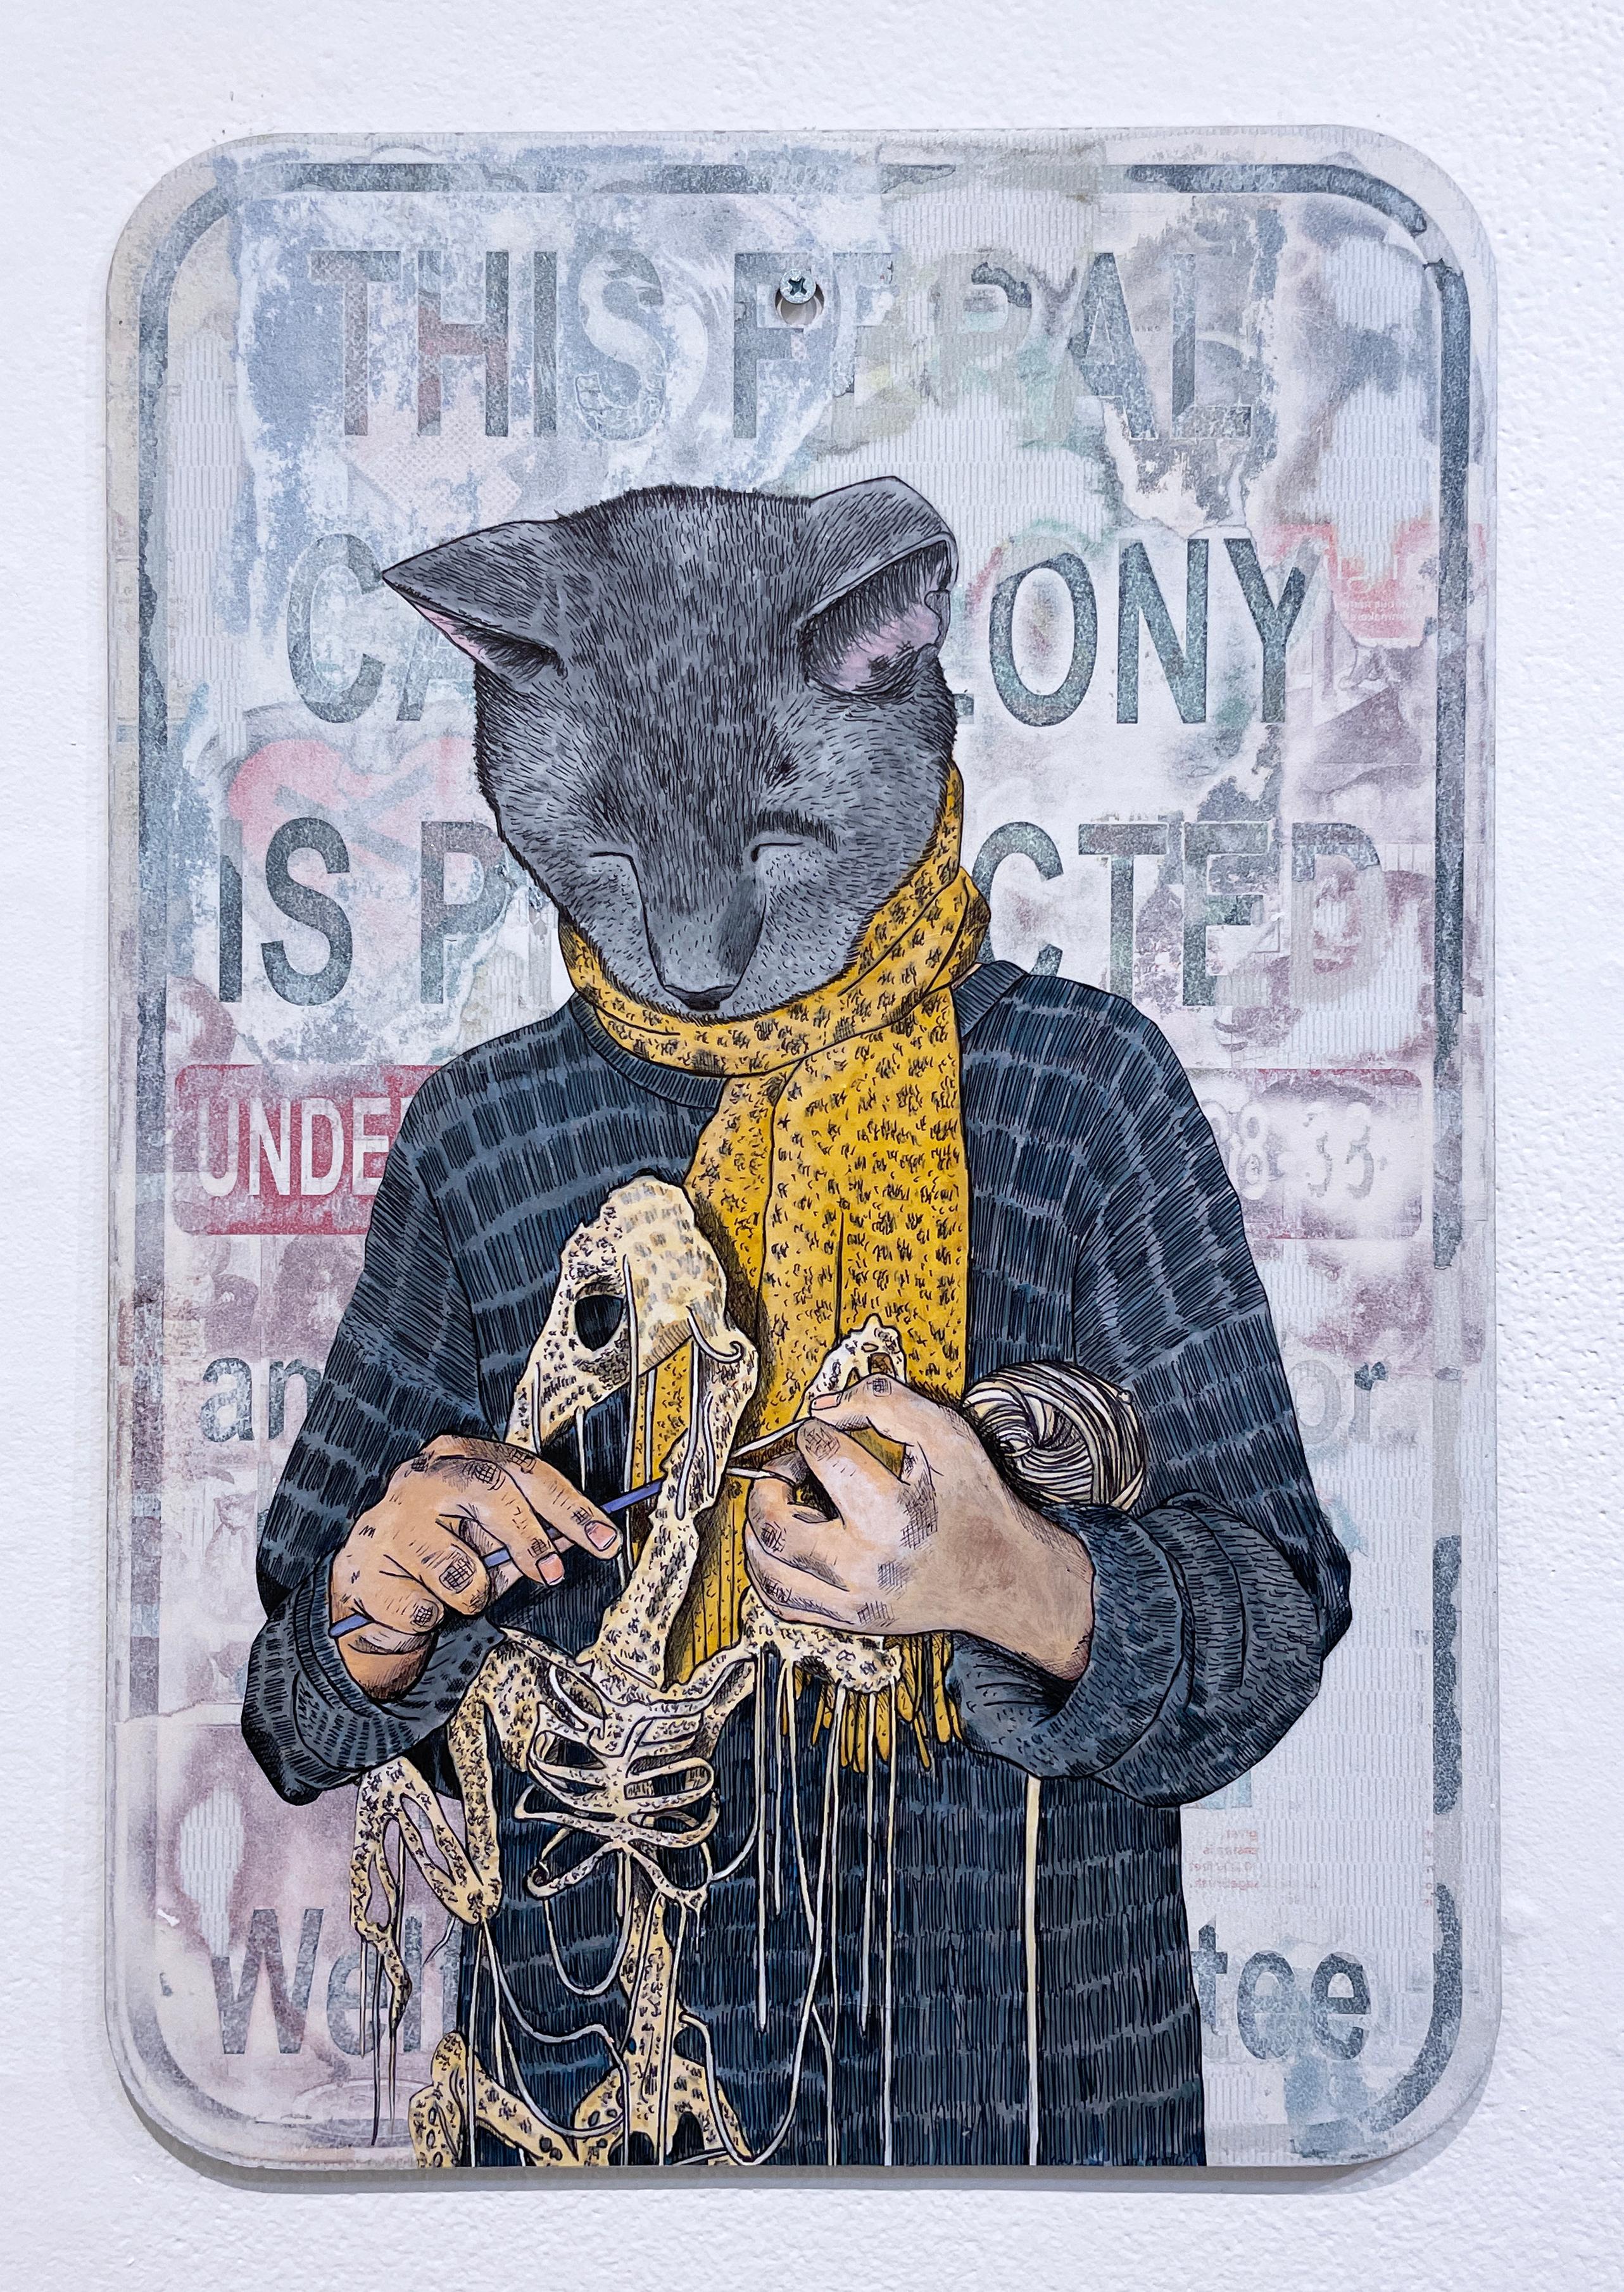 Cat Colony, 2023, graffiti mixed media street sign, knitting cat portrait - Painting by Sean 9 Lugo